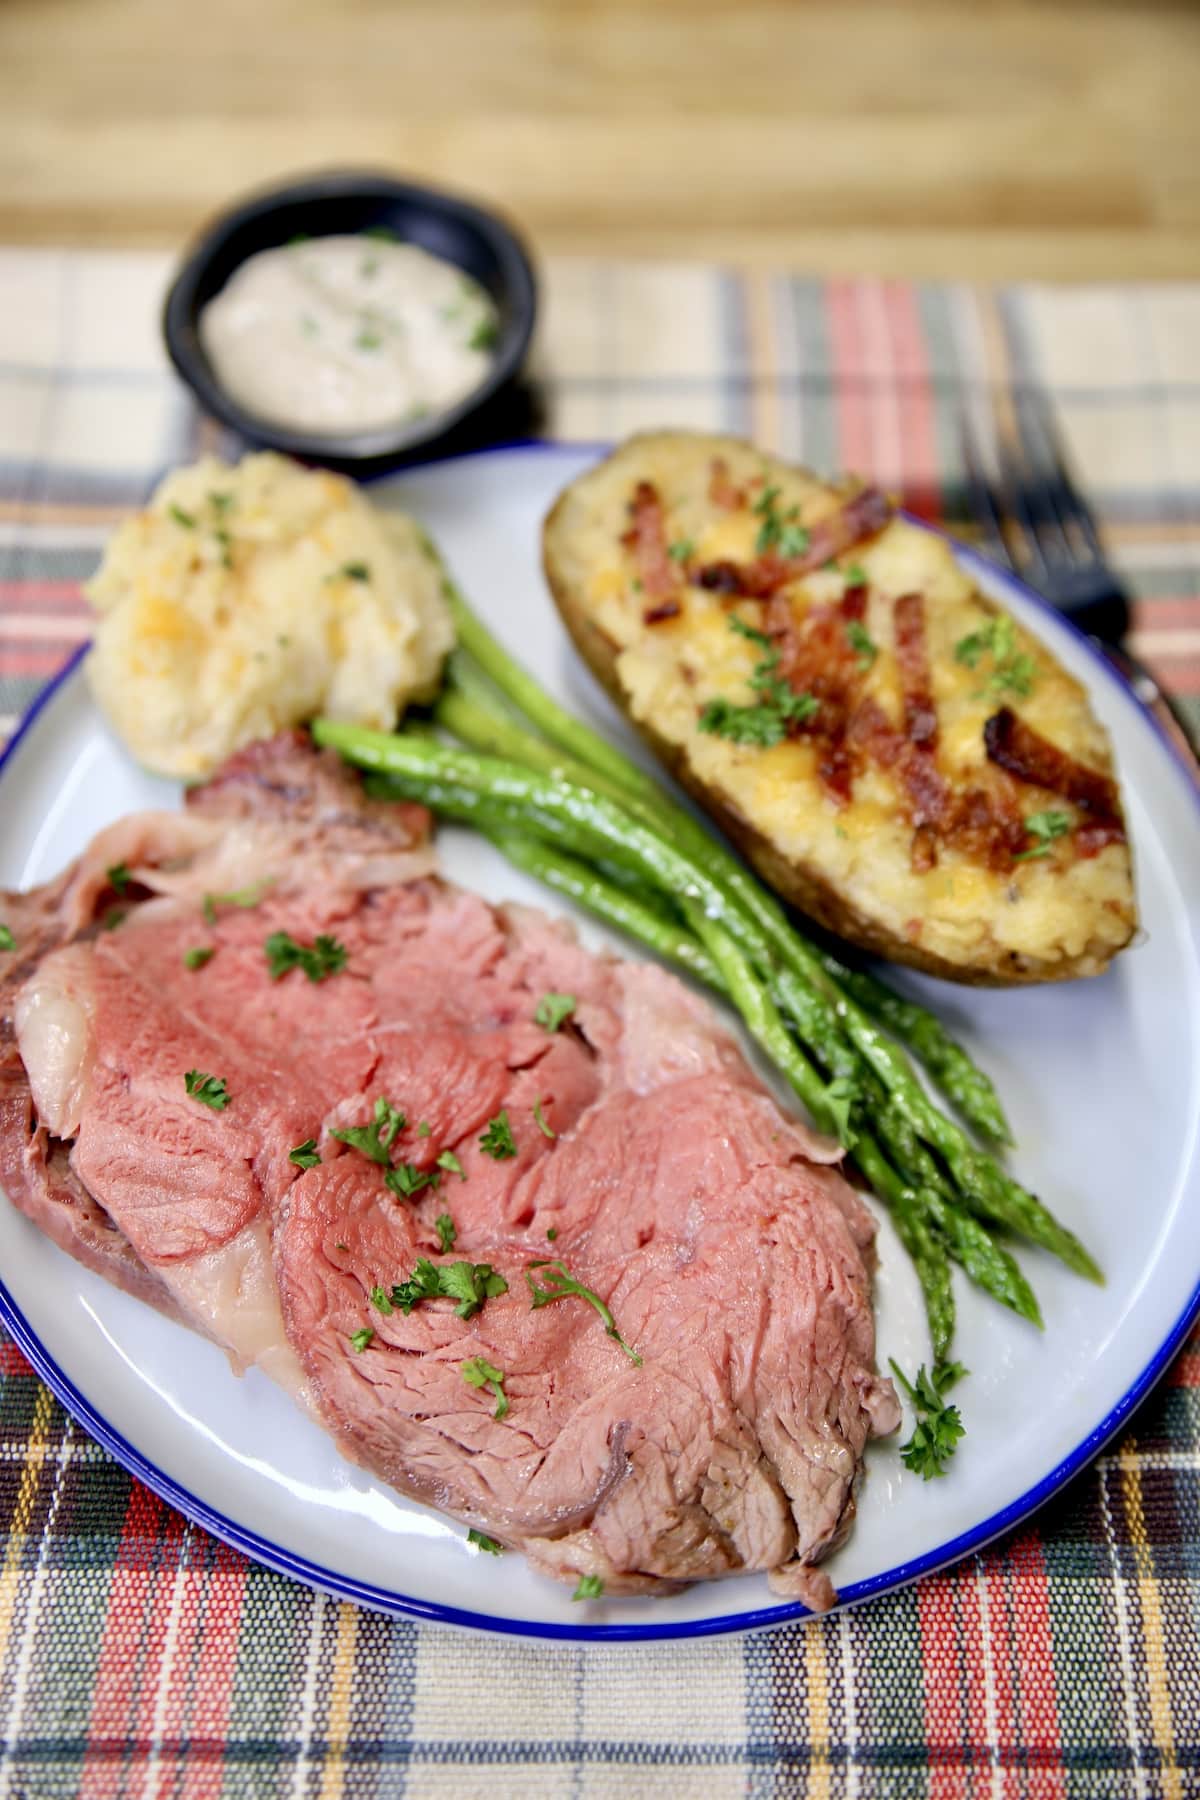 Plate with slice of prime rib, baked potato, asparagus.